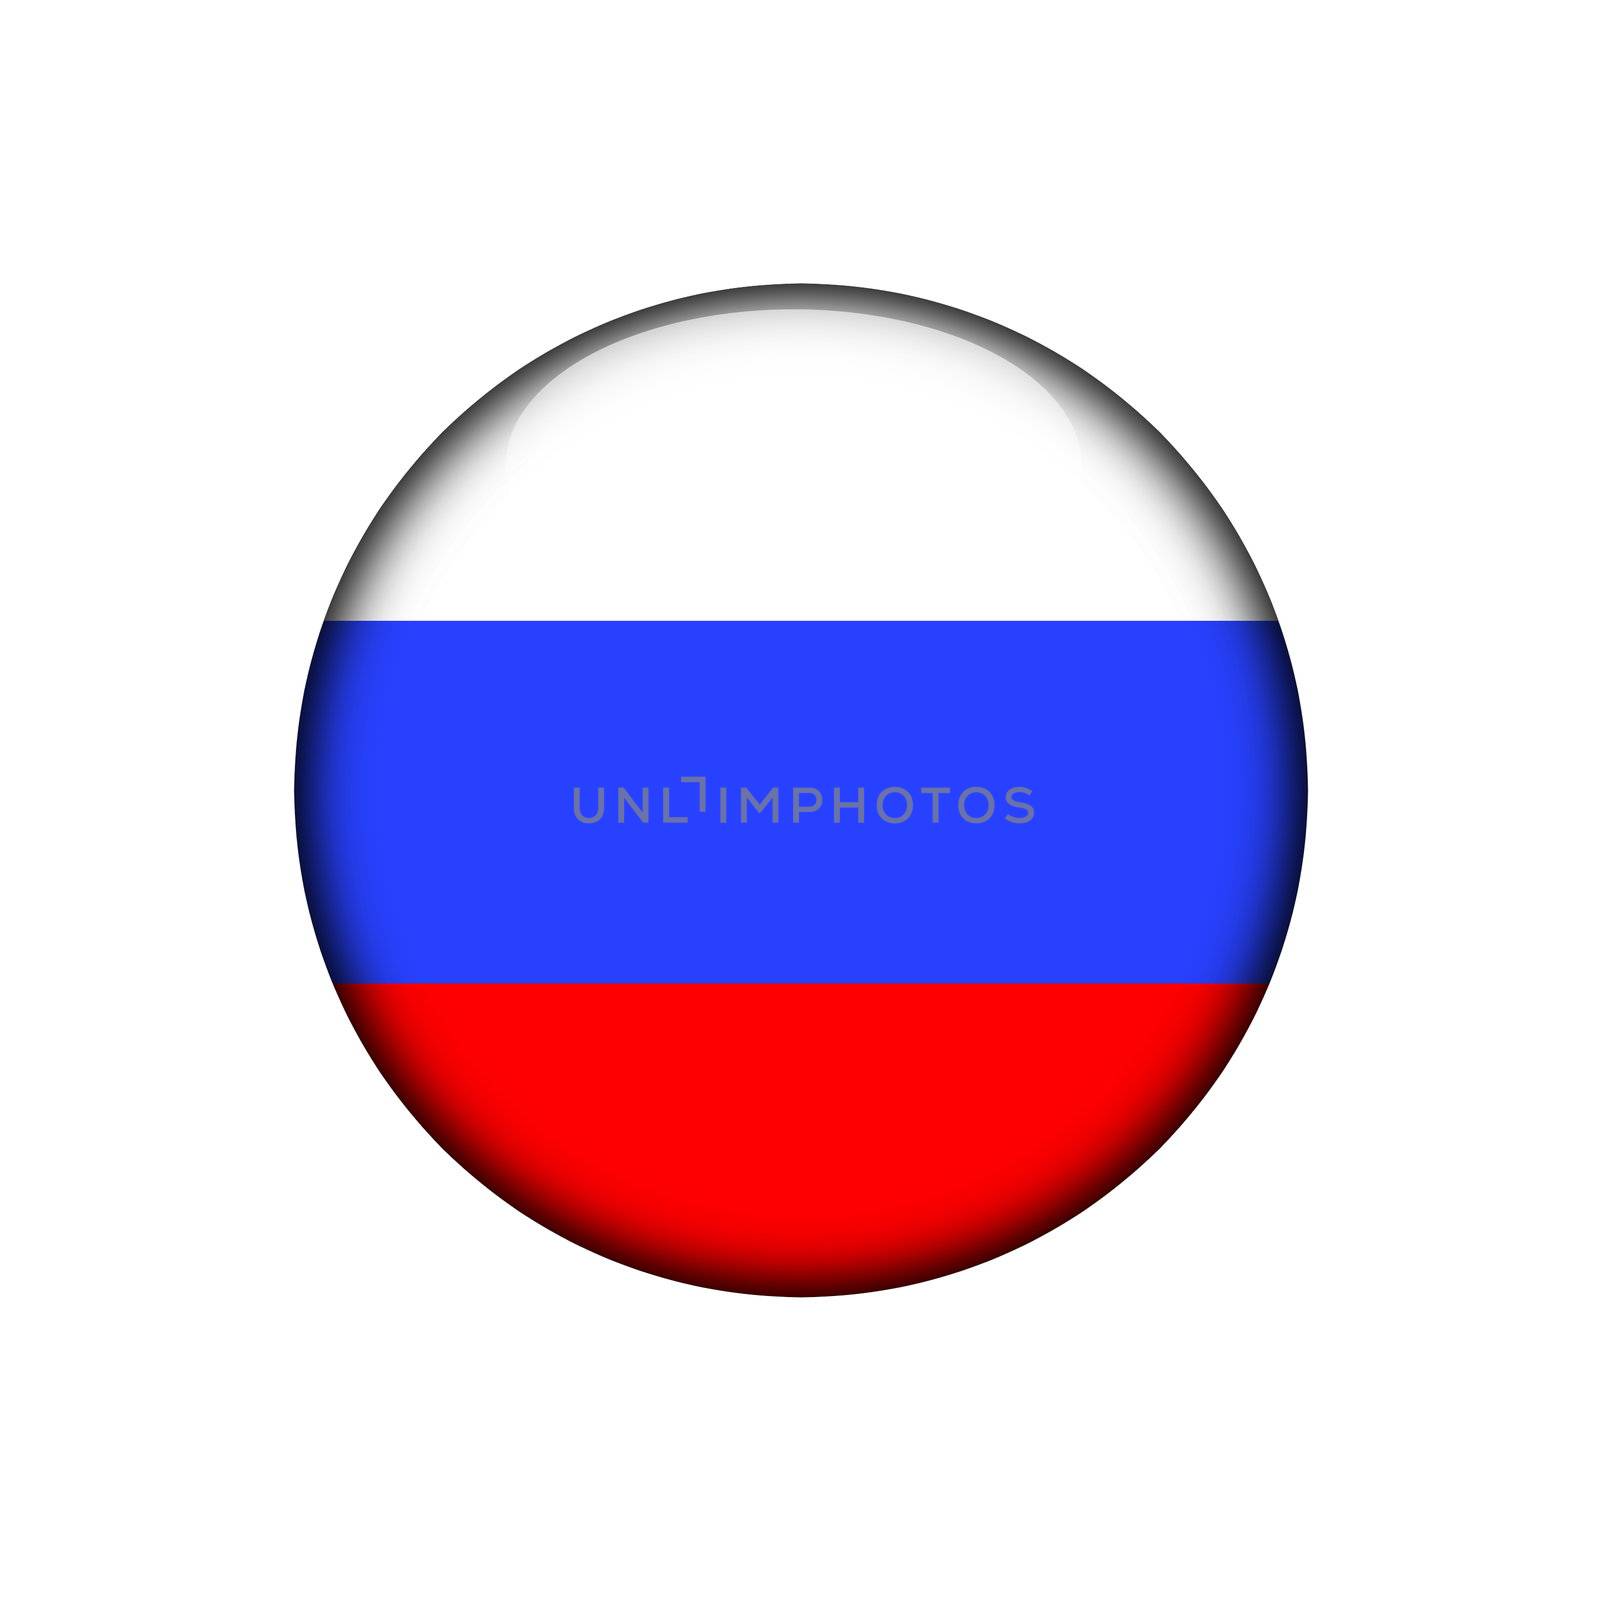 russia button flag sign or badge for website